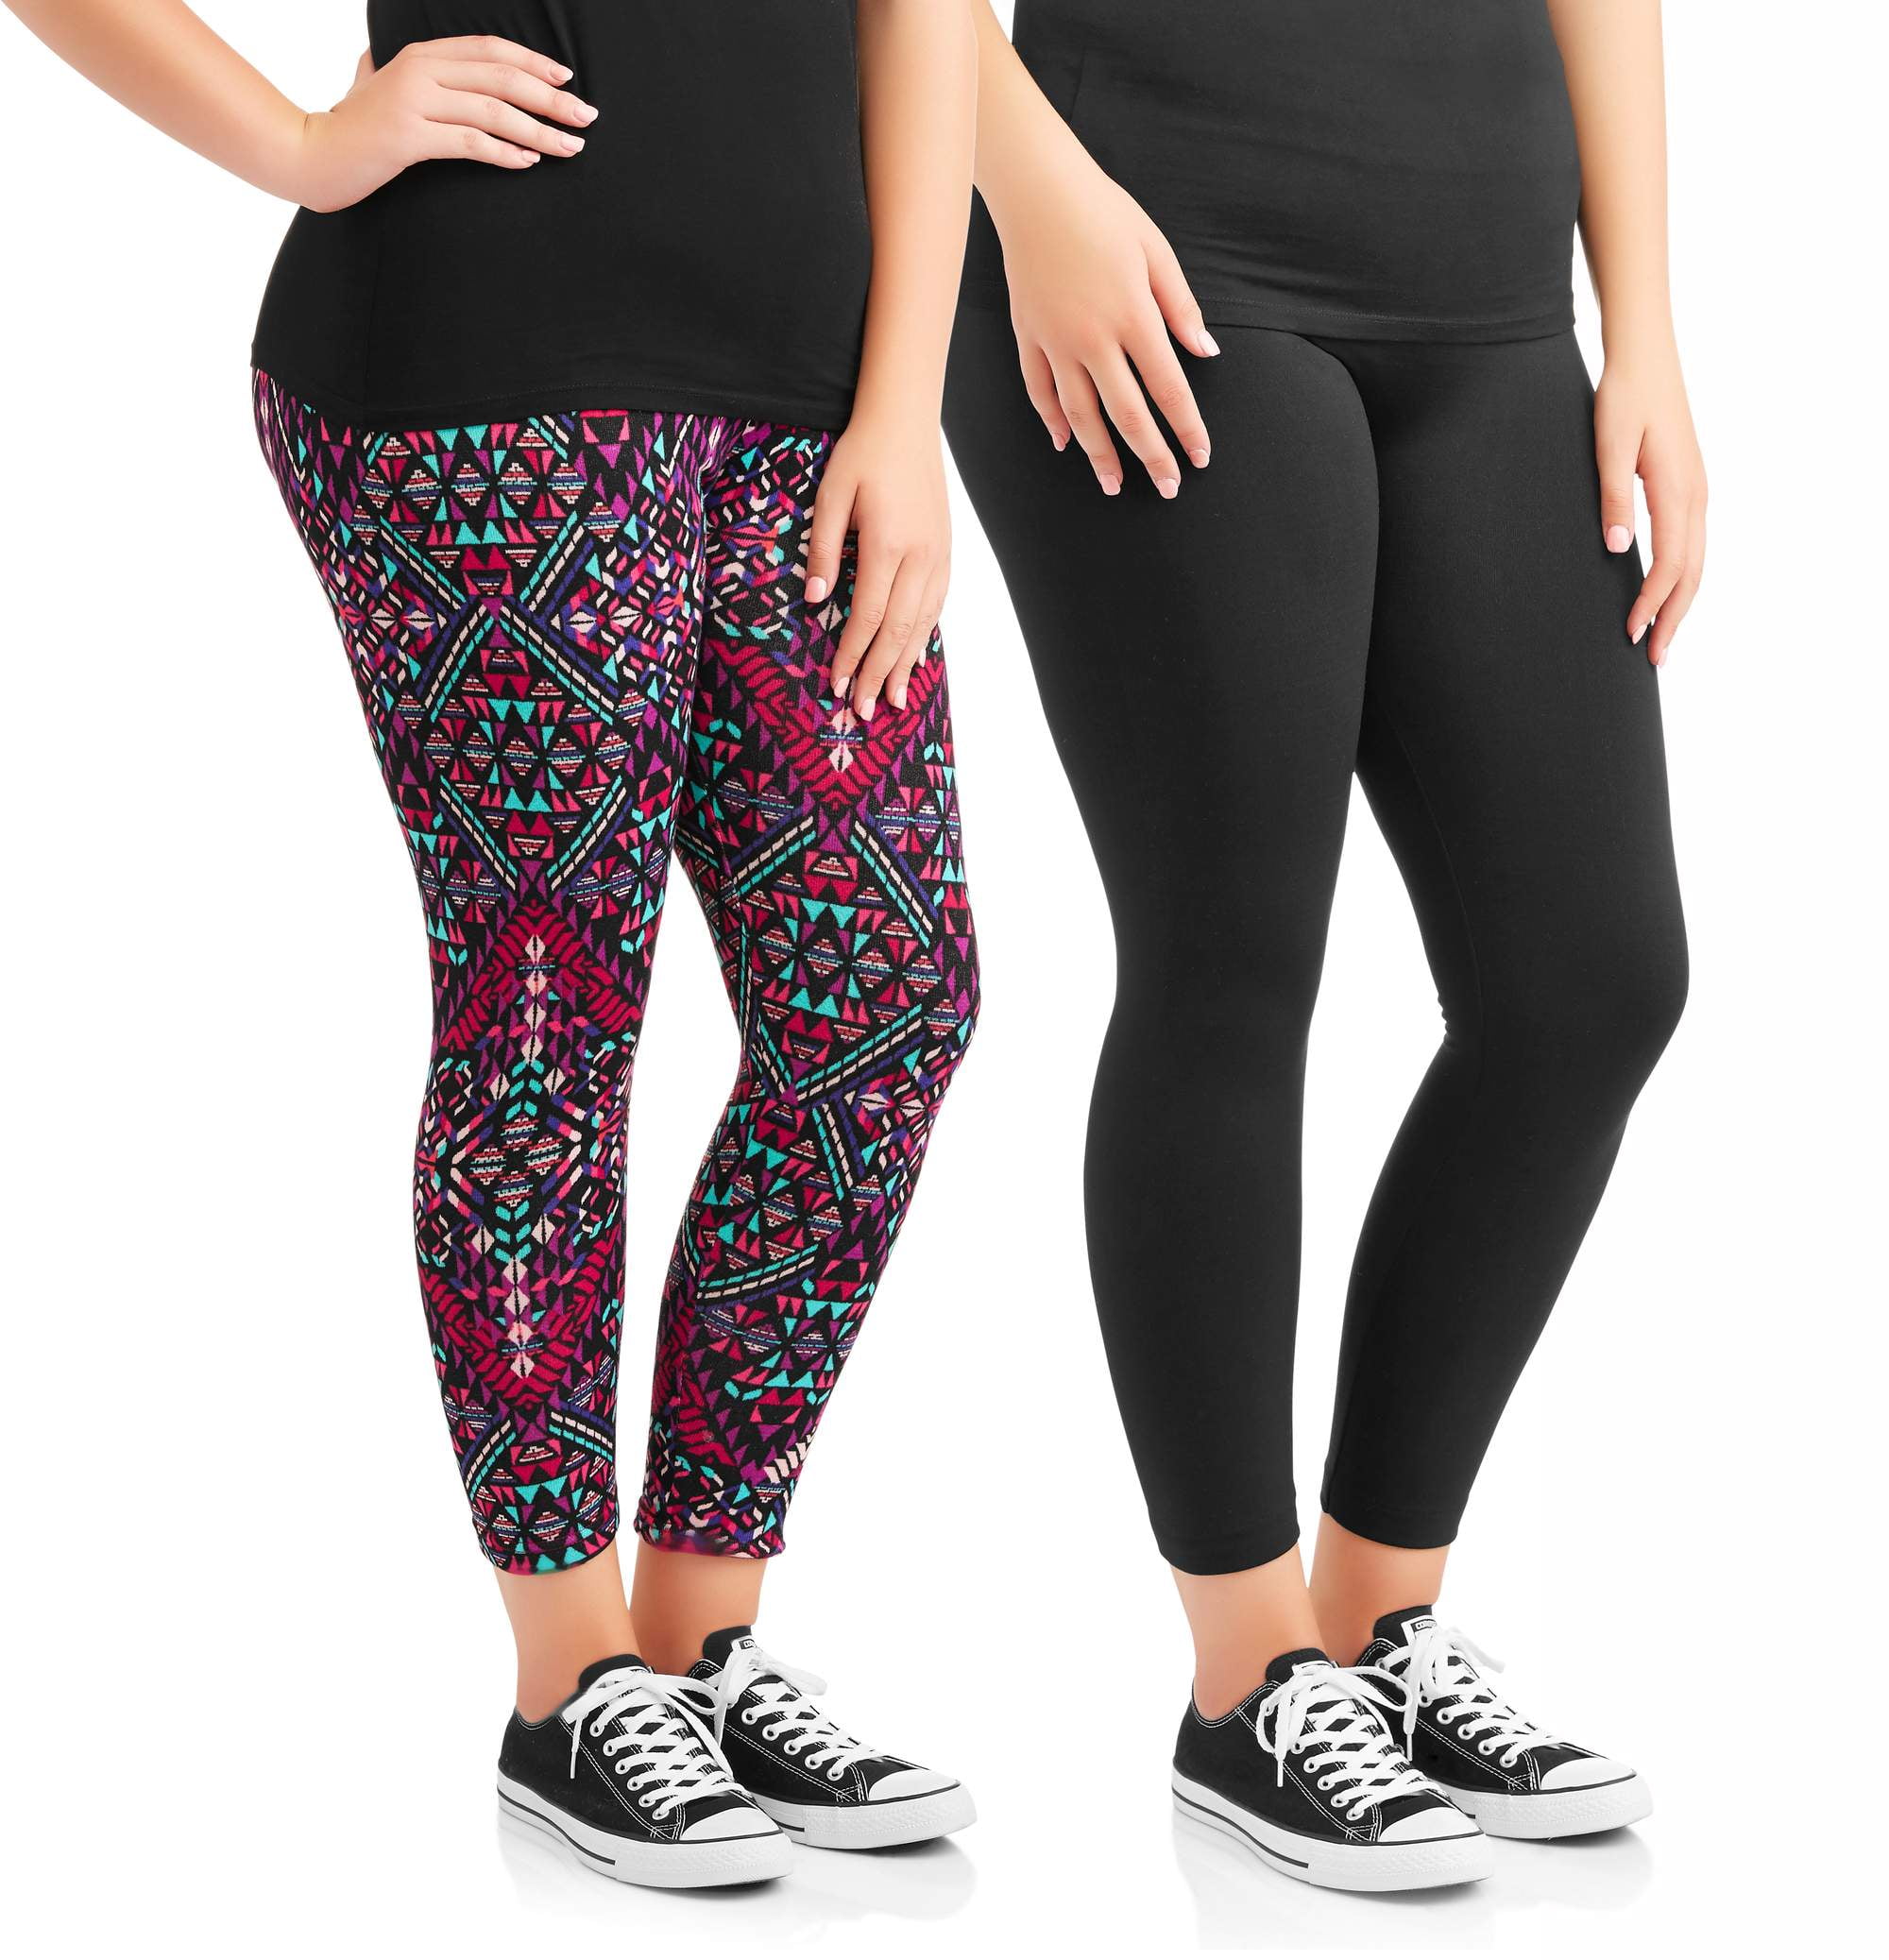 Leggings Depot-LY5R128-PINK 5 Waistband Yoga Solid Leggings, One Size 